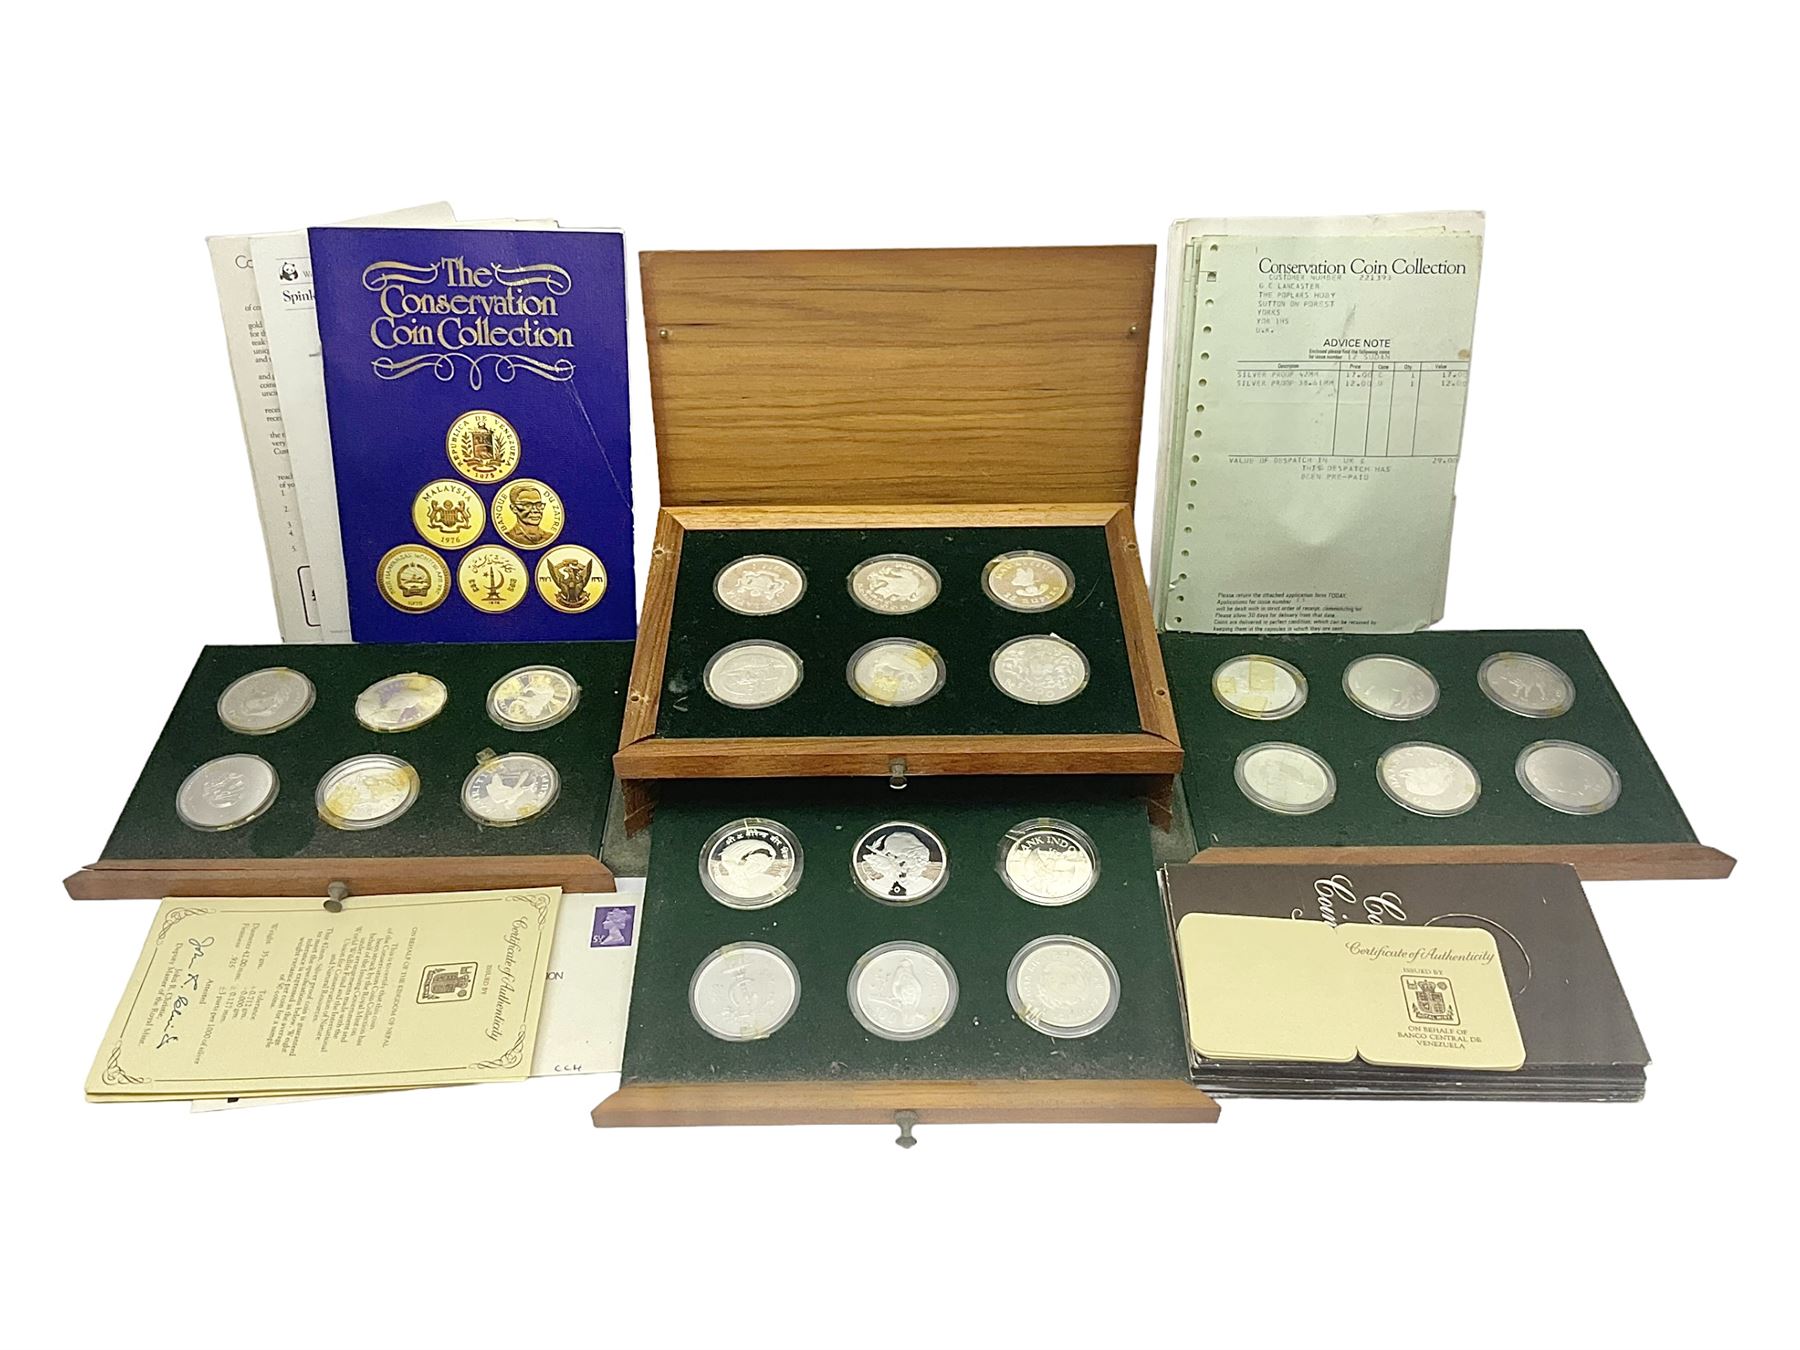 The Royal Mint 'Conservation Coin Collection' formed of twenty-four silver proof coins